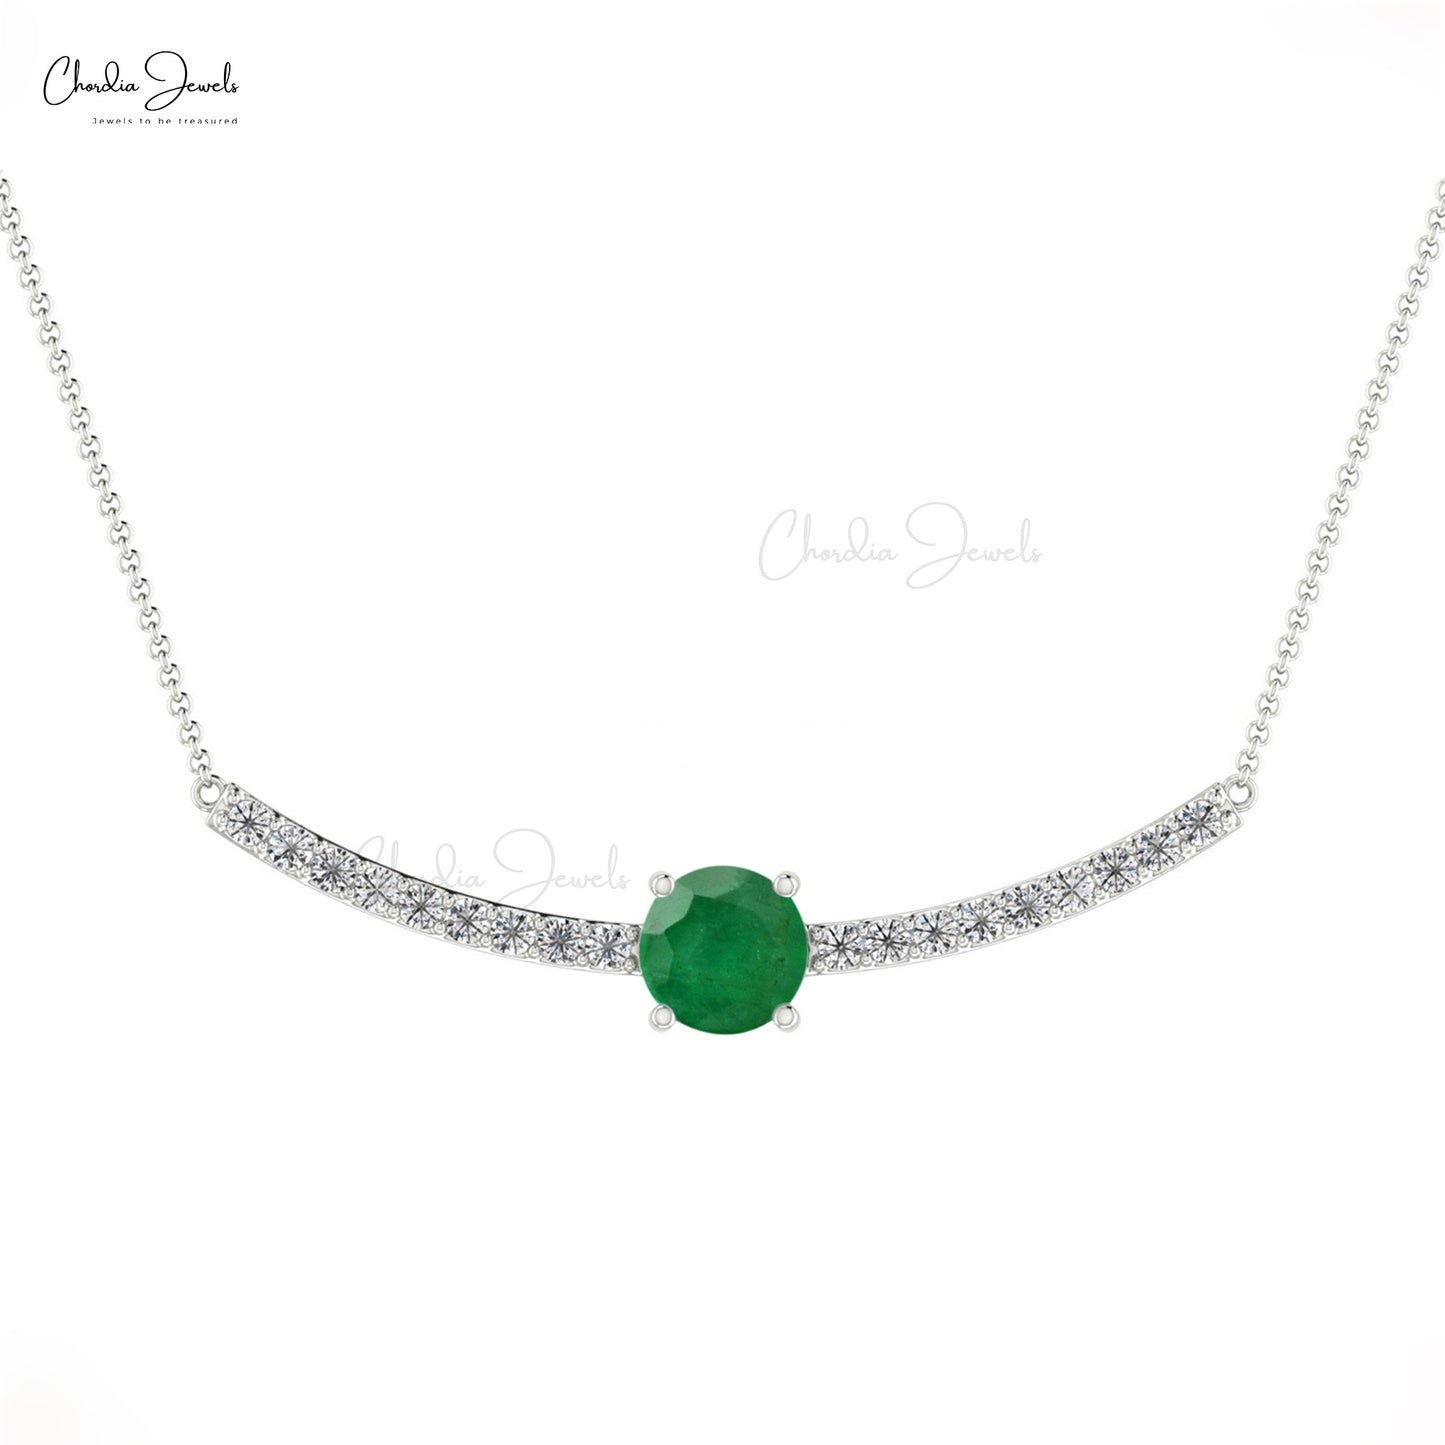 Genuine 0.5ct Emerald Statement Necklace 14k Real Gold Diamond Accents Birthstone Necklace